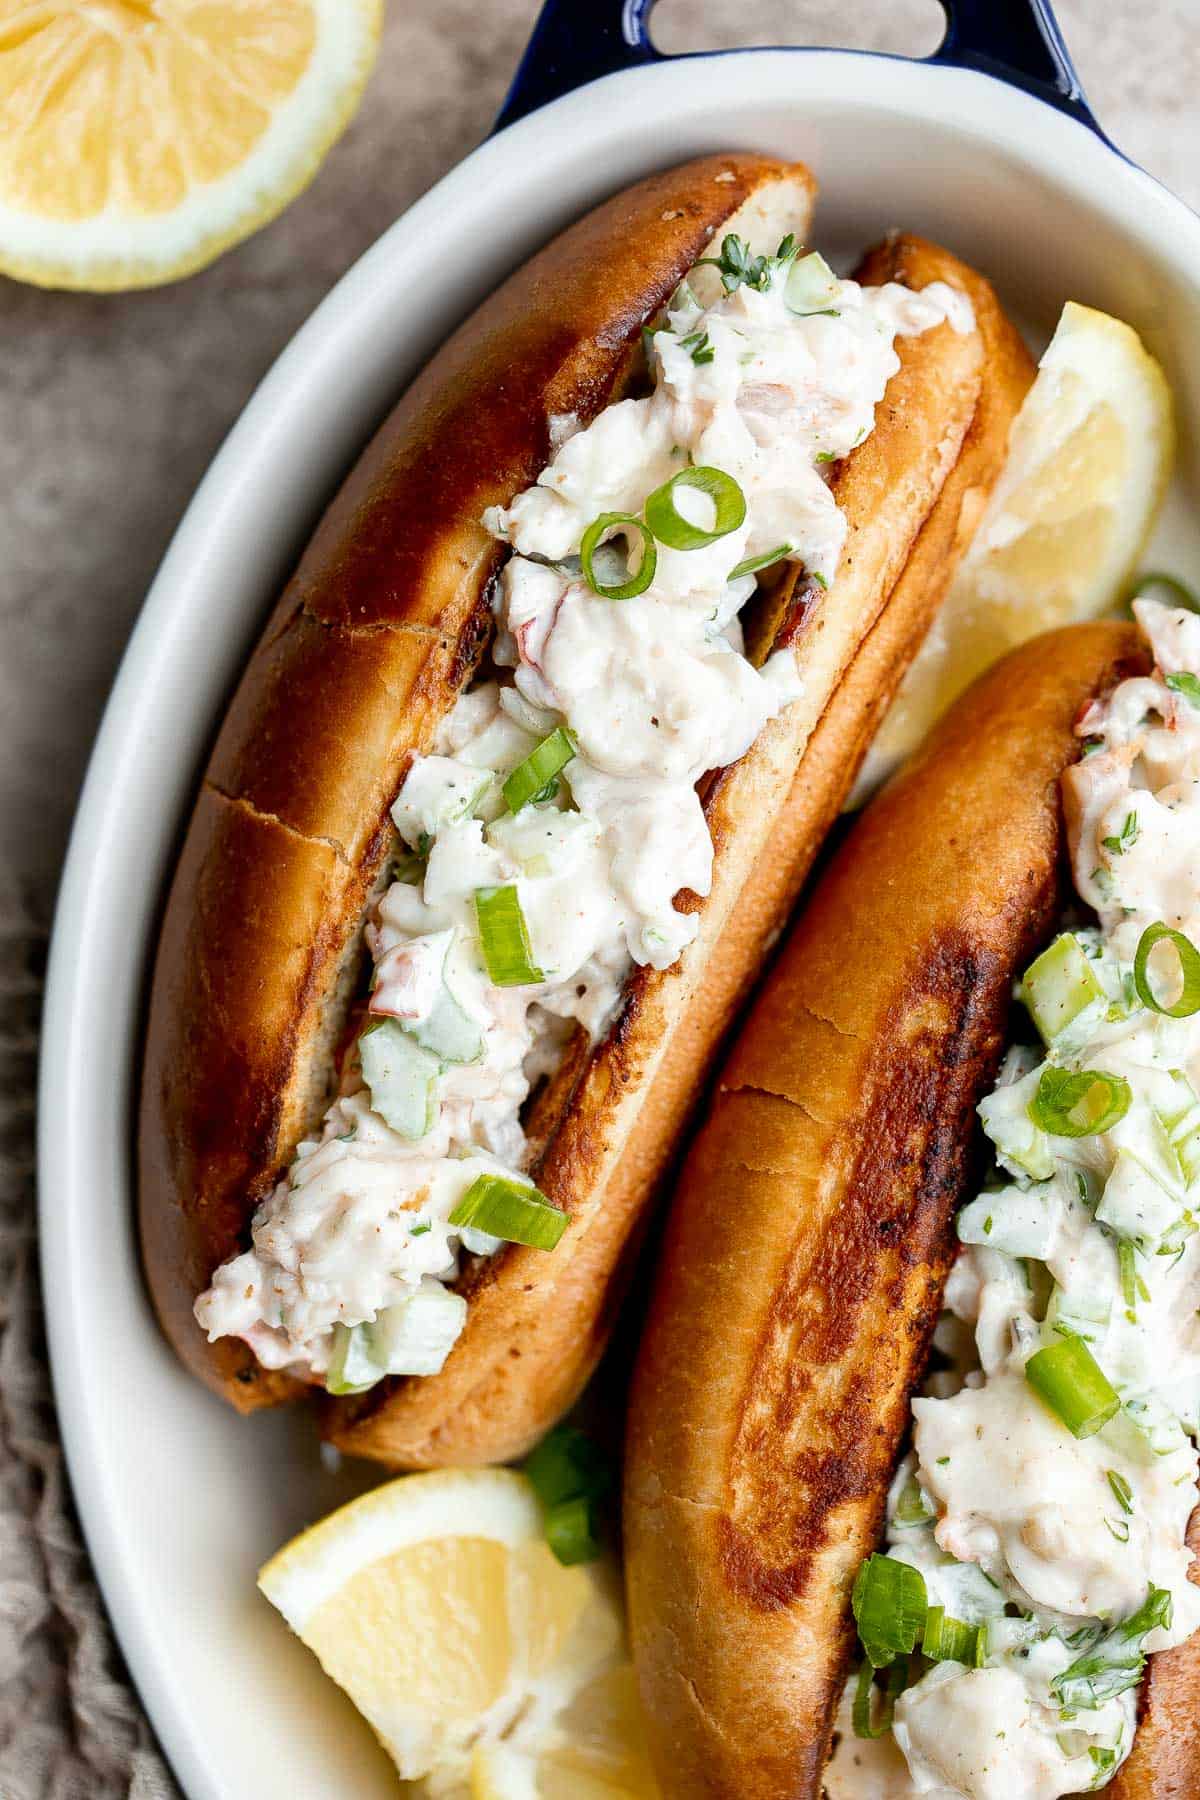 New England Lobster Rolls are a classic sandwich loaded with fresh lobster meat. Make them in just 10 minutes and serve them all summer long. | aheadofthyme.com